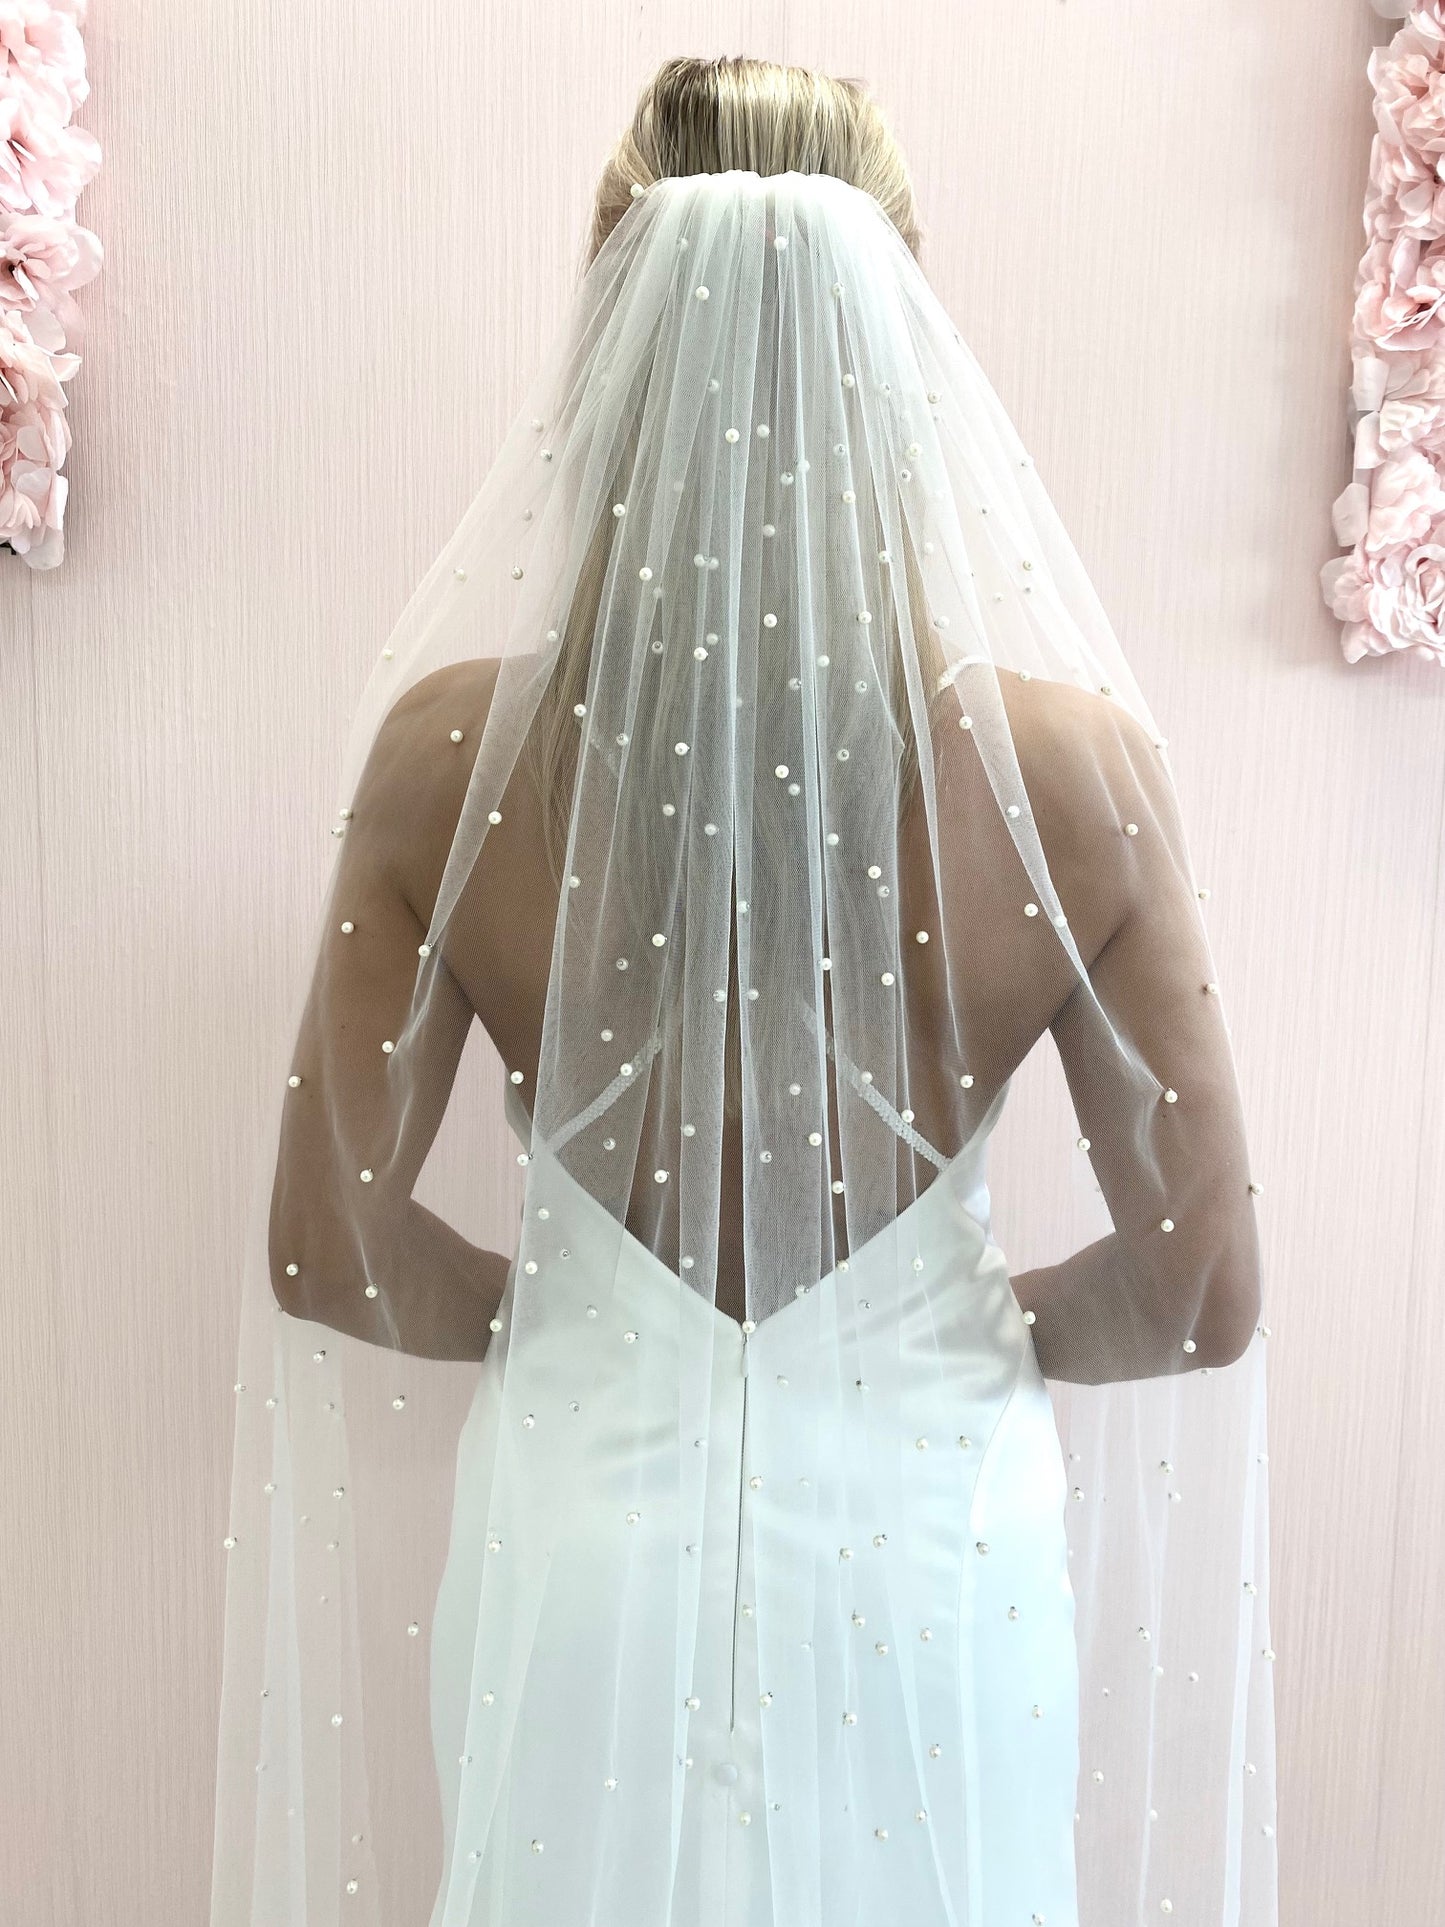 Pearl Bridal Veil, Waltz Lenght One Tier Wedding Veil with Pearls